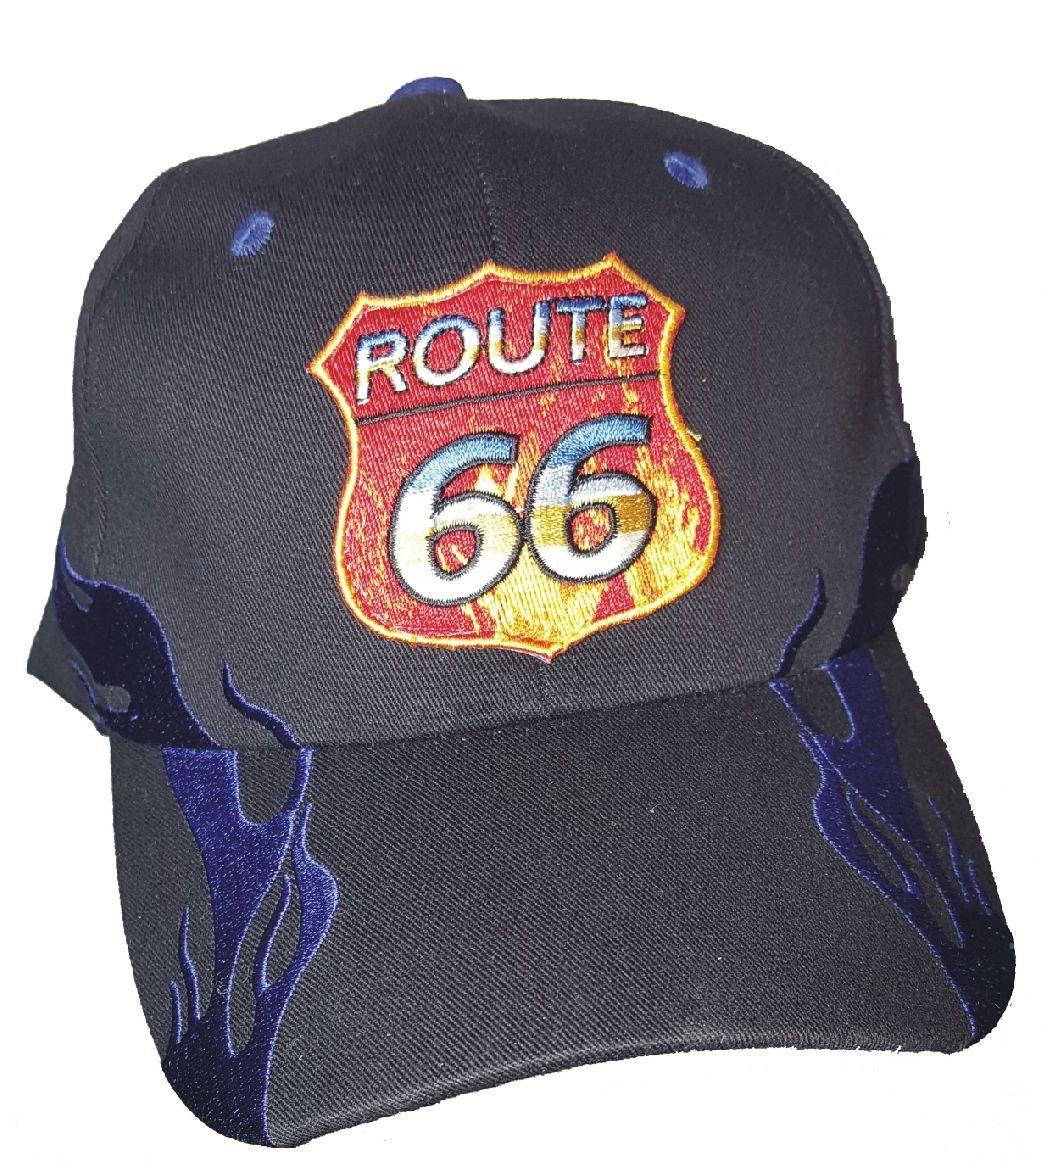 Side Flame Logo - Royal Blue side flame cap with ANY ROUTE 66 logo (but the ROUTE 66 ...